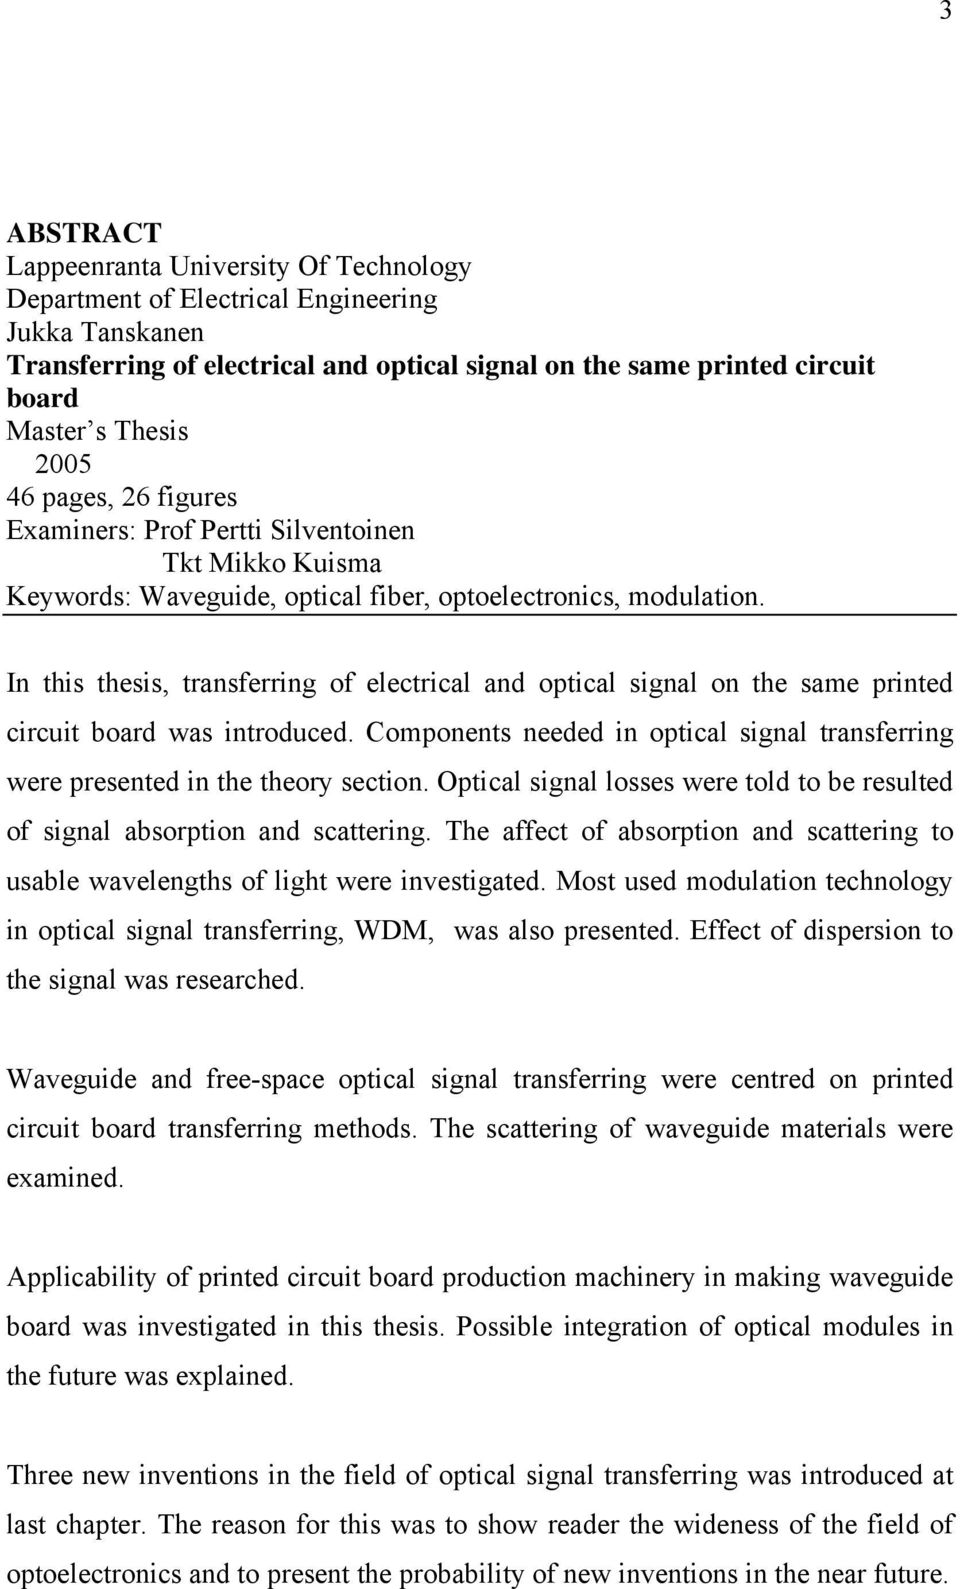 In this thesis, transferring of electrical and optical signal on the same printed circuit board was introduced. Components needed in optical signal transferring were presented in the theory section.